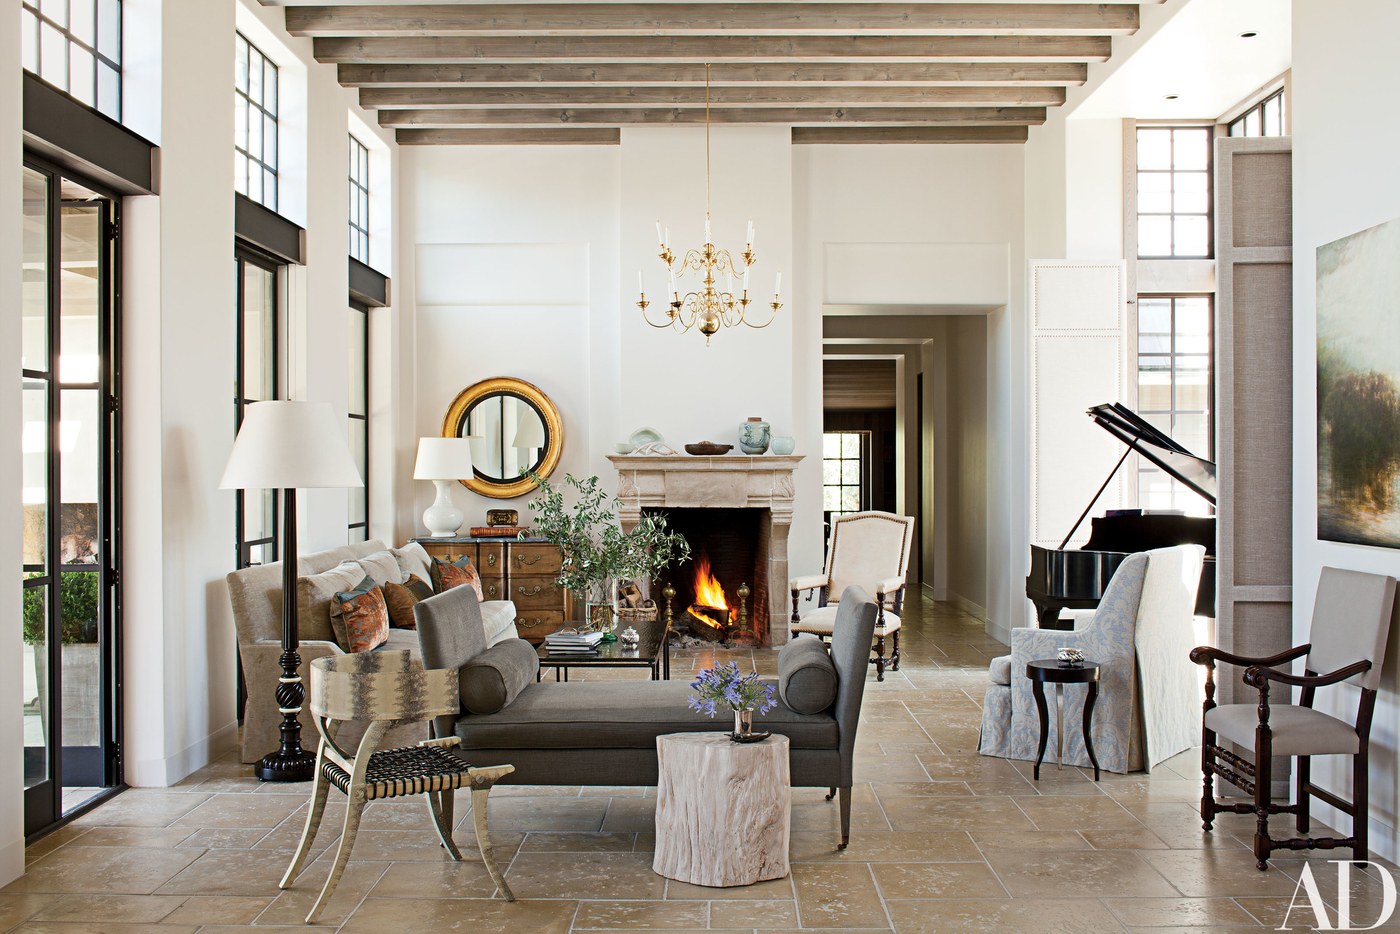 I wanted high ceilings with beams, wrought iron windows and a clean aesthetic, like this pretty house by Bobby McAlpine for Architectural Digest (photo Roger Davies).